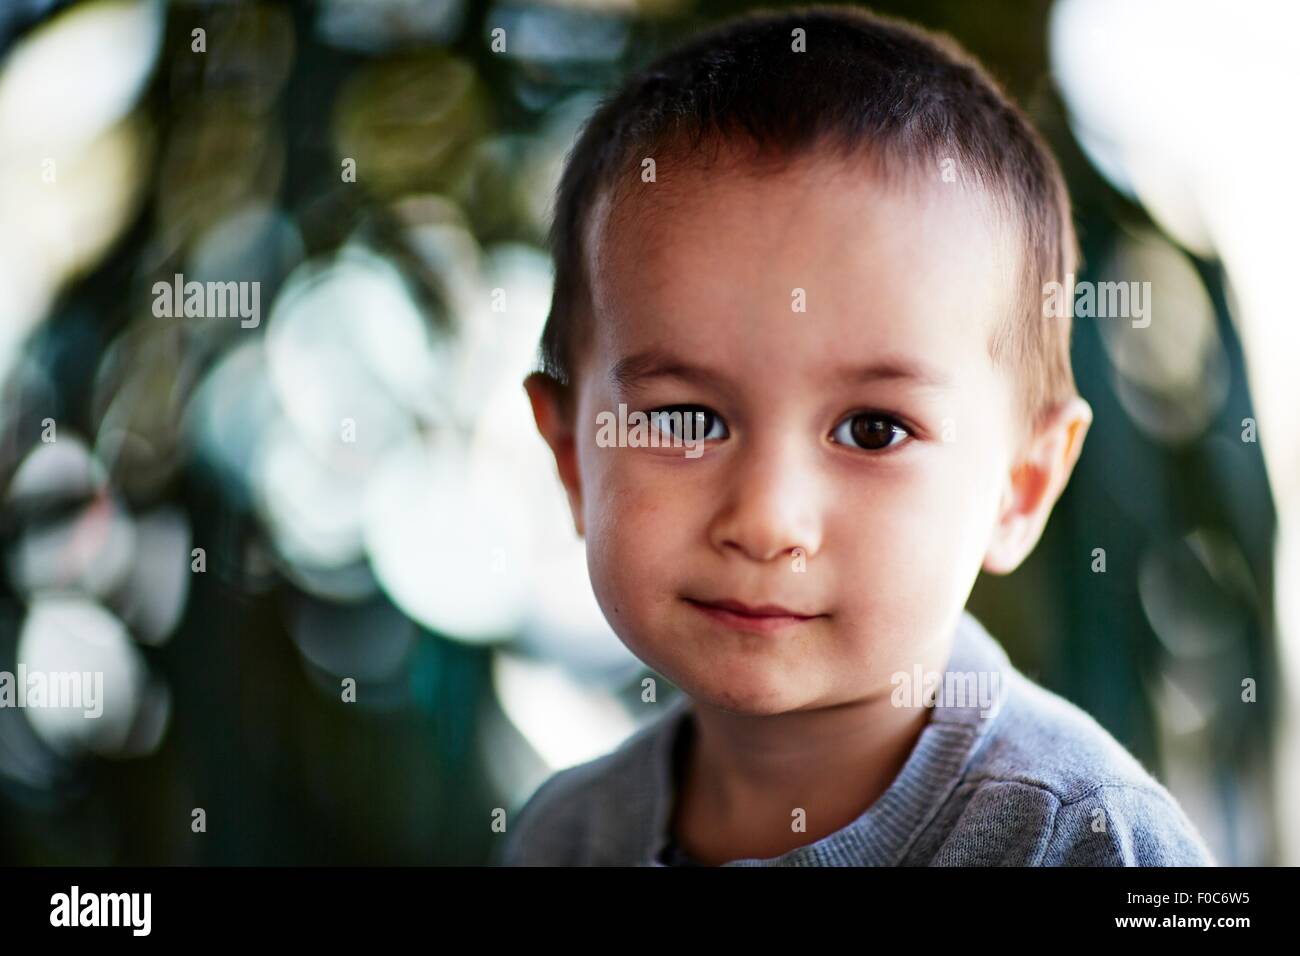 Portrait of smiling toddler Stock Photo